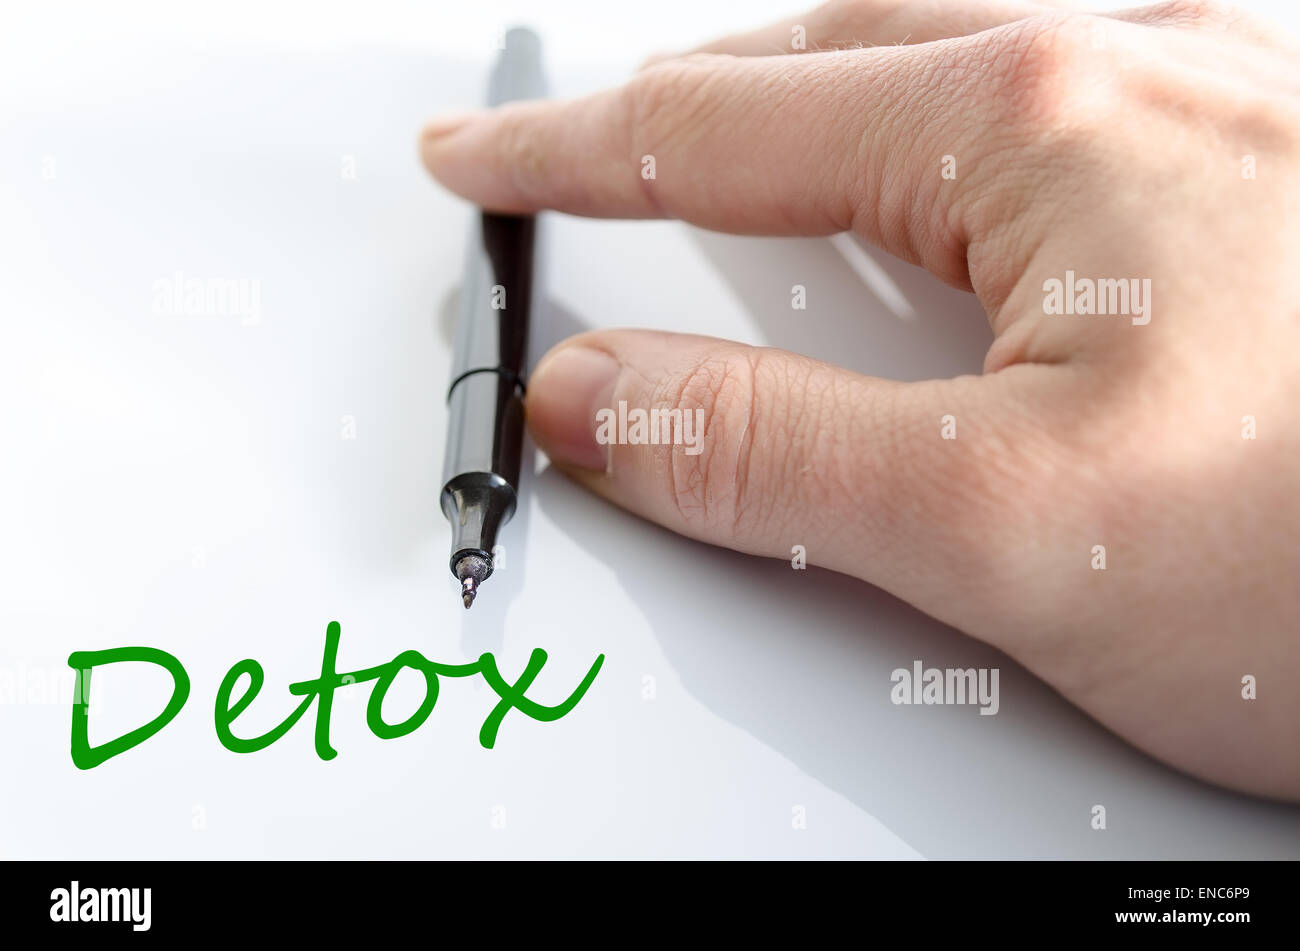 Pen in the hand isolated over white background detox concept Stock Photo